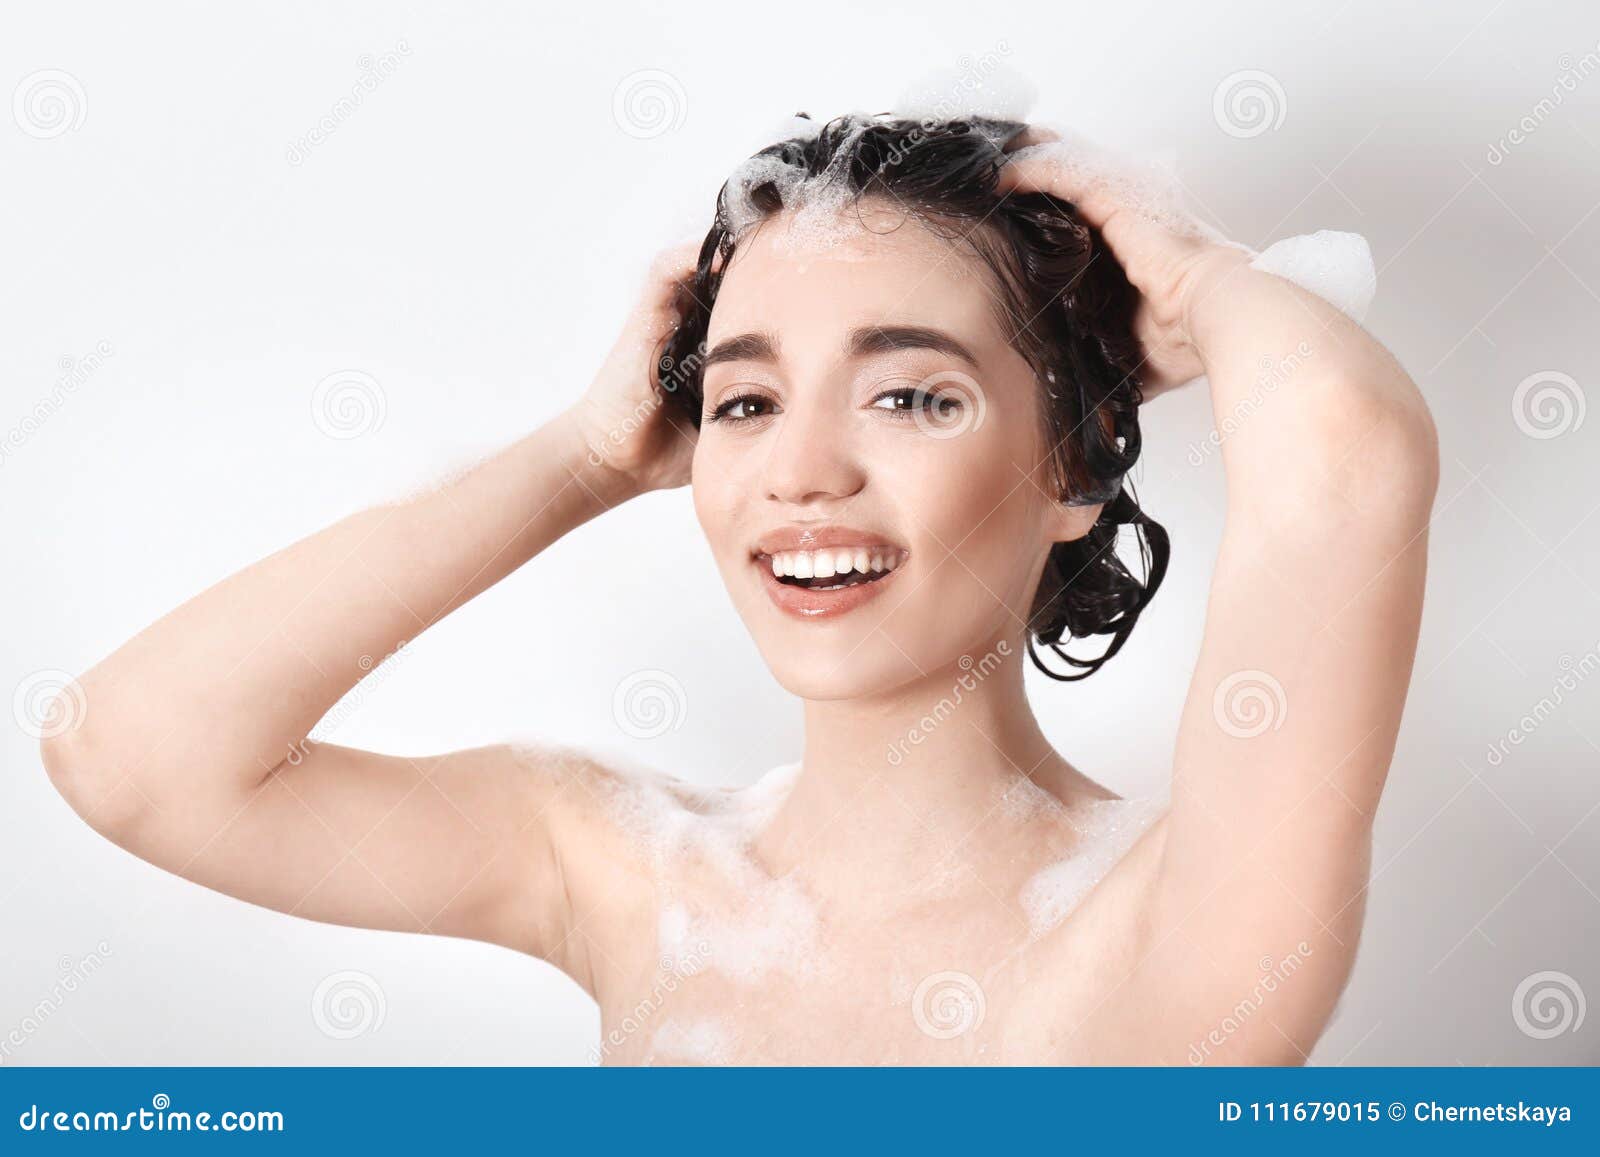 Young Emotional Woman Washing Hair While Taking Shower 